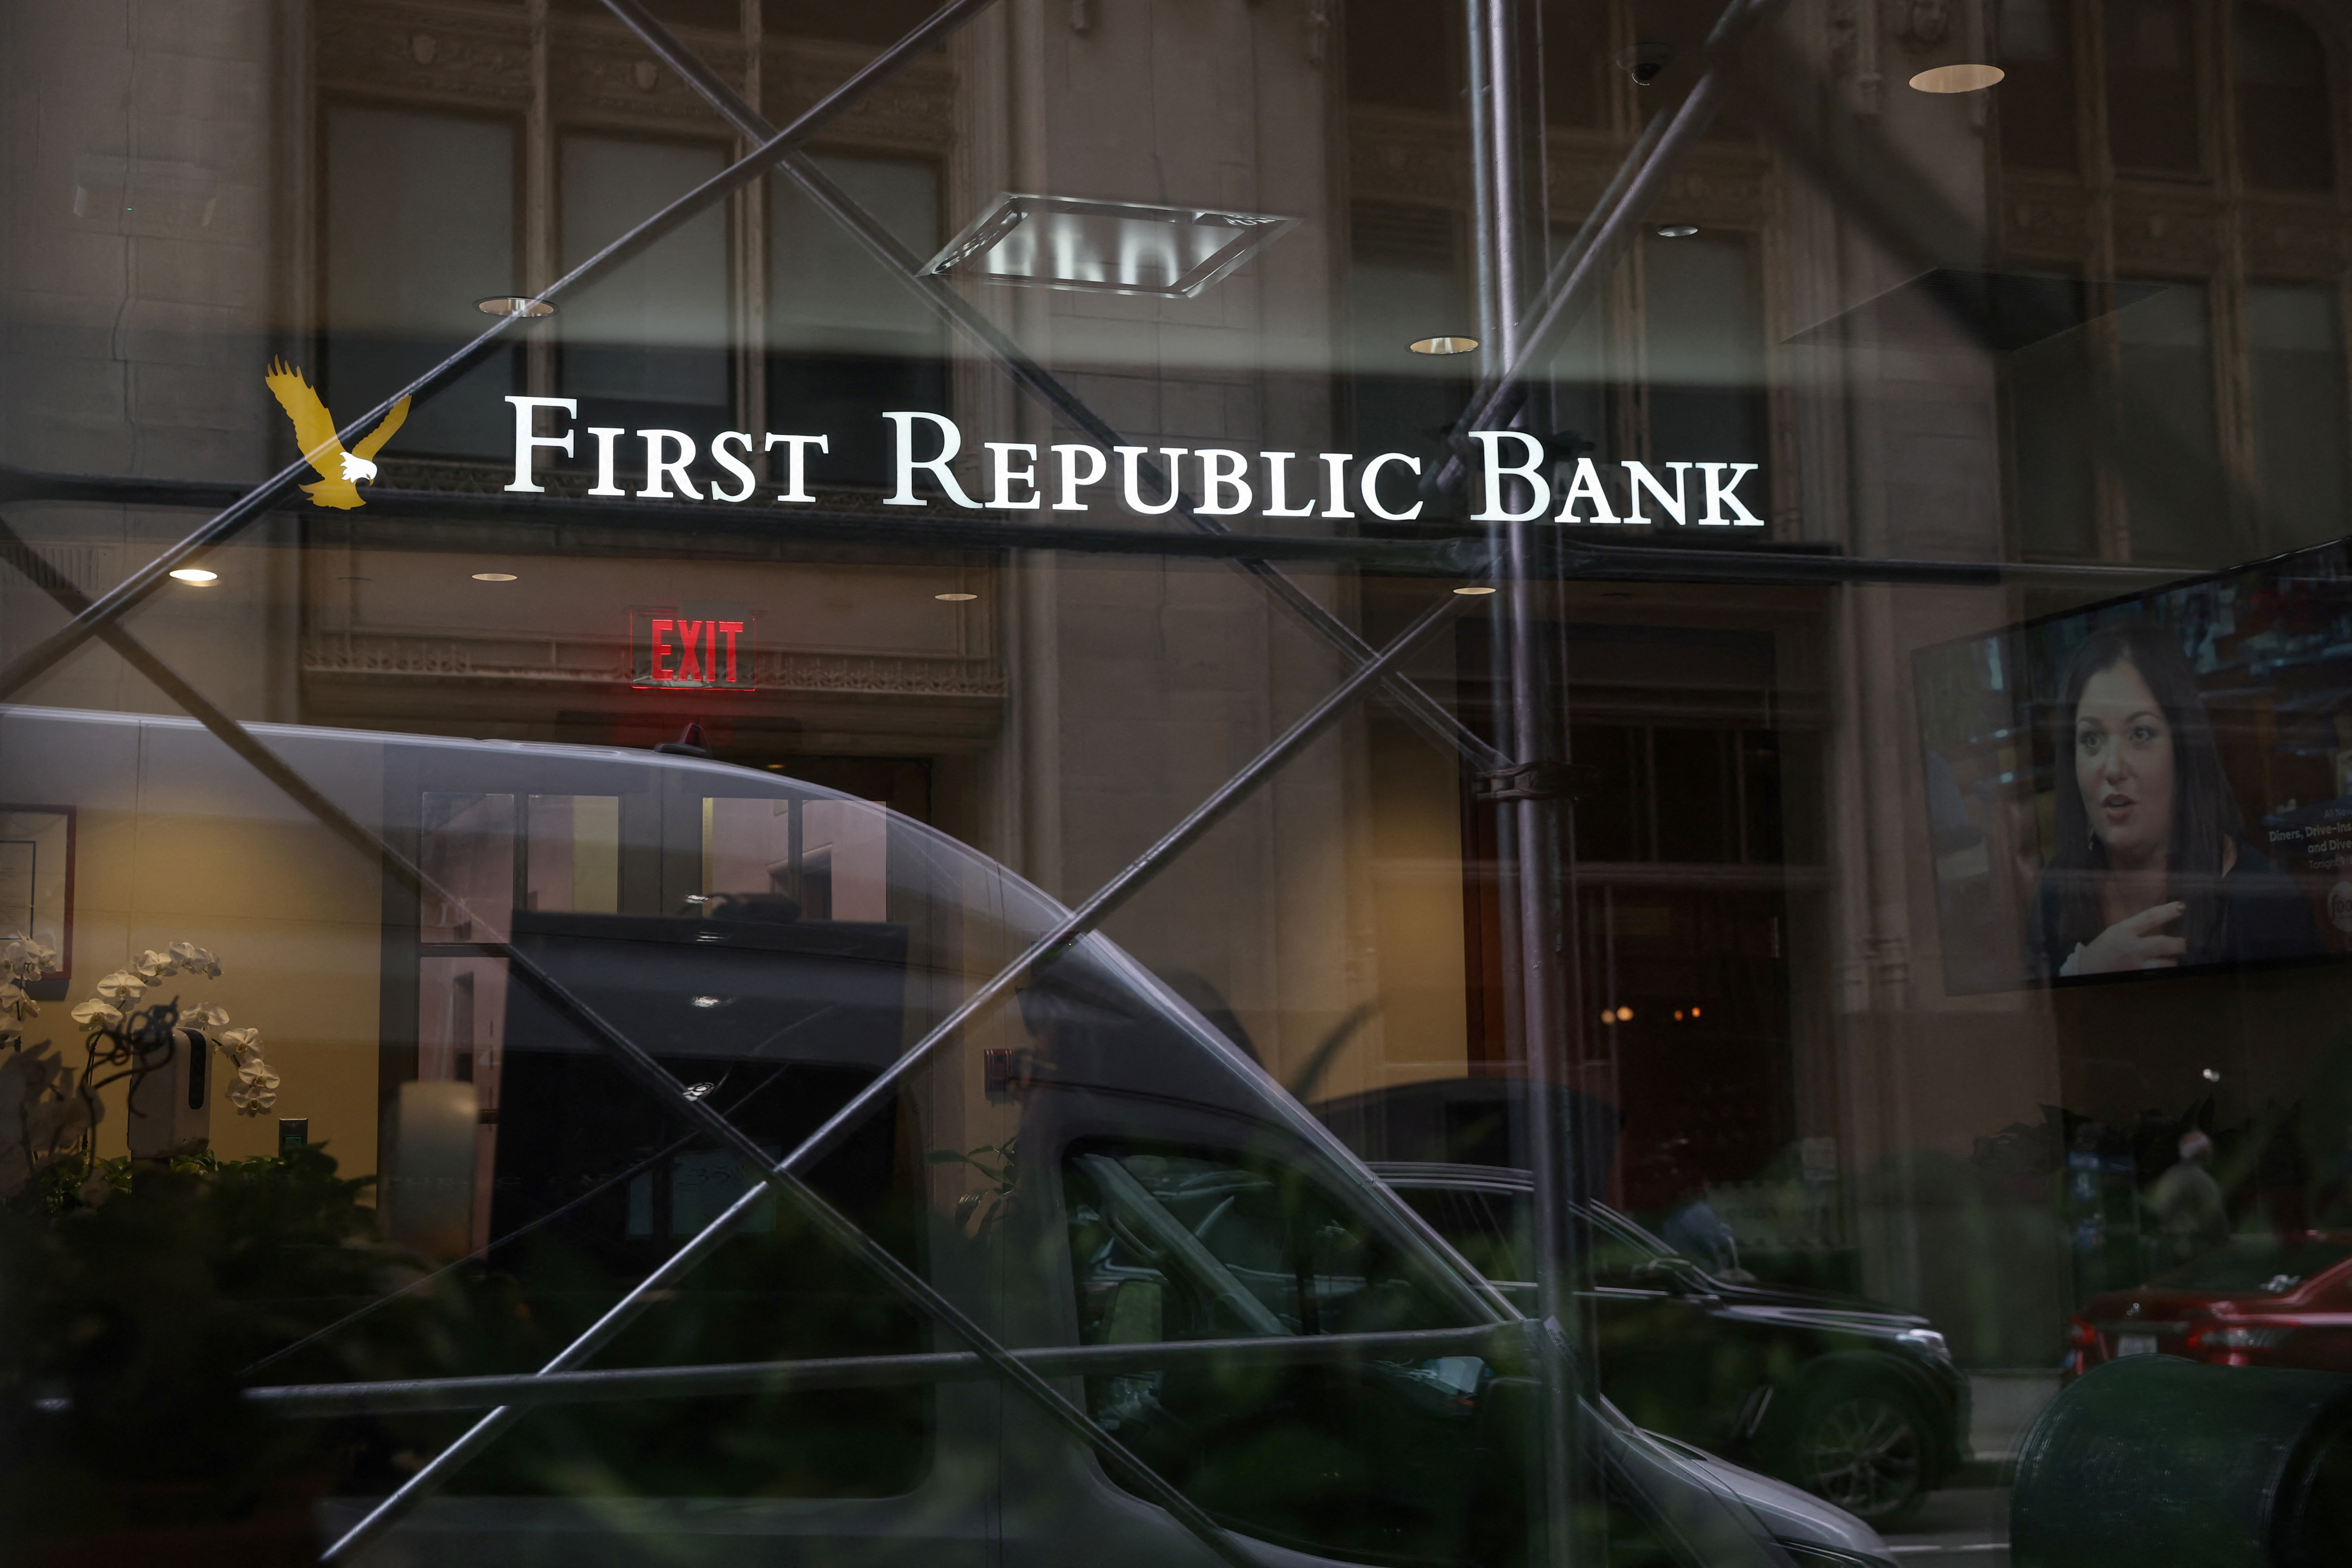 First Republic Bank branch in New York City